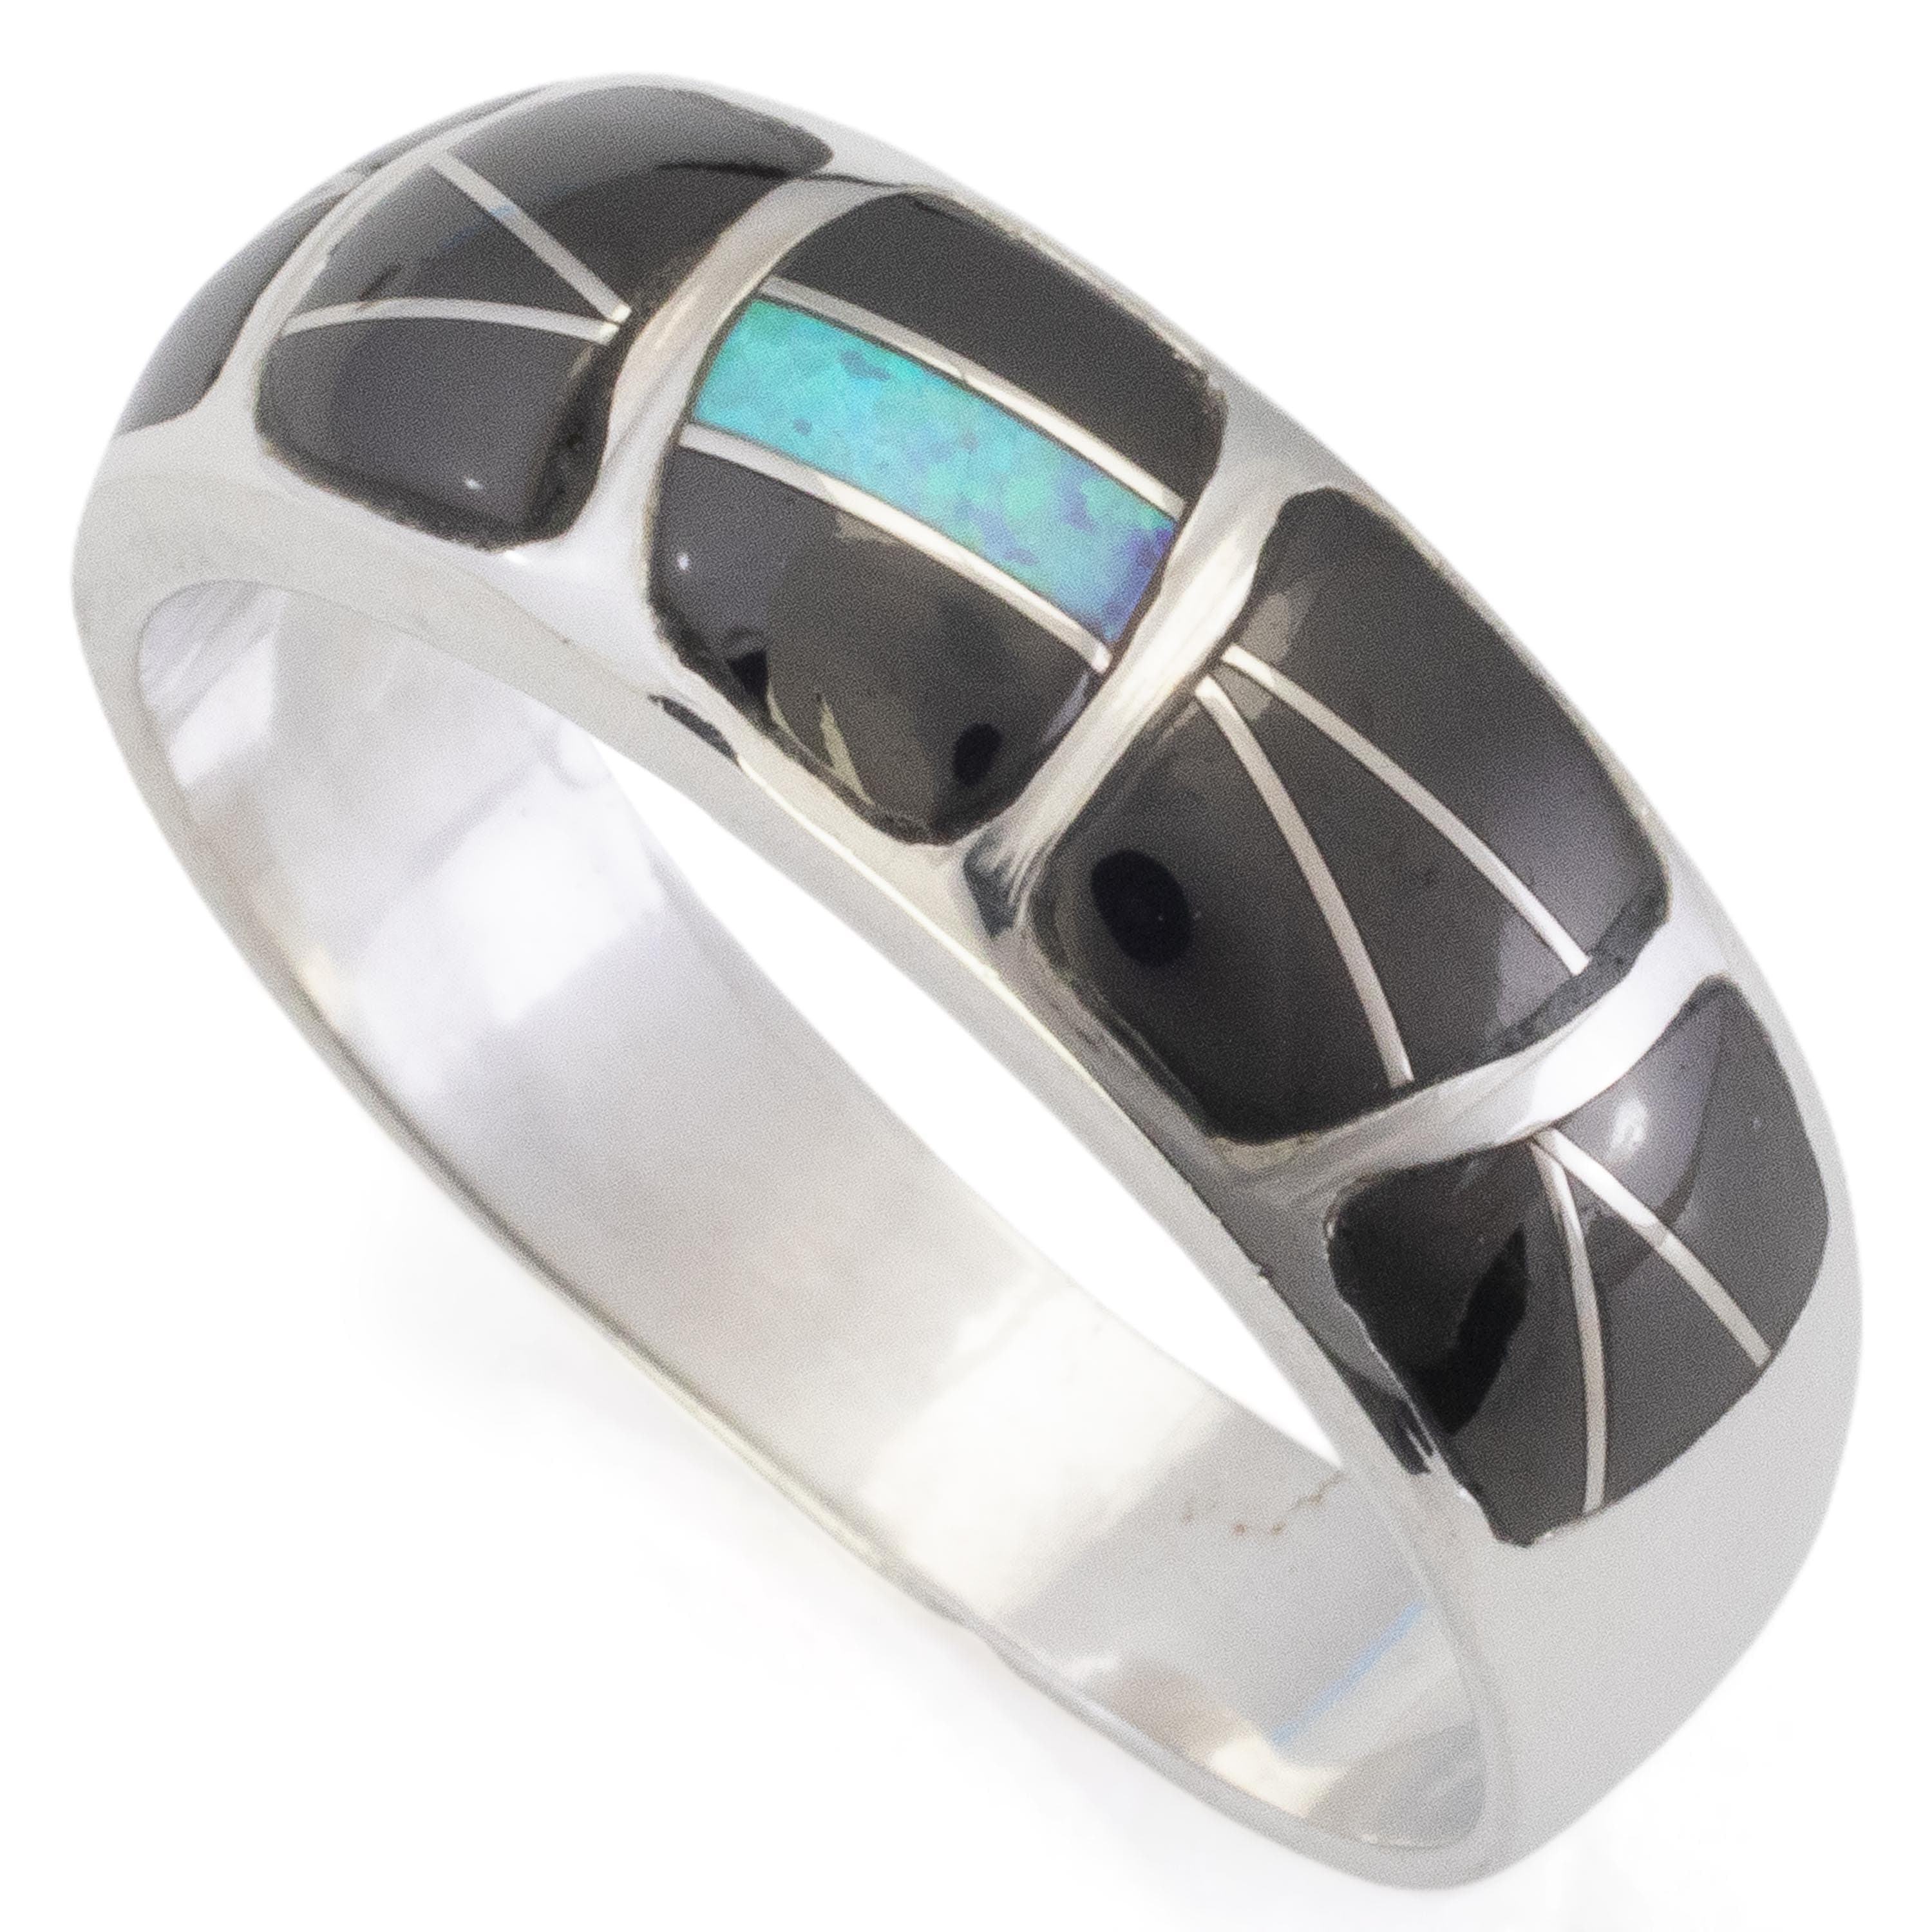 Kalifano Southwest Silver Jewelry Black Onyx 925 Sterling Silver Ring Handmade with Laboratory Opal Accent